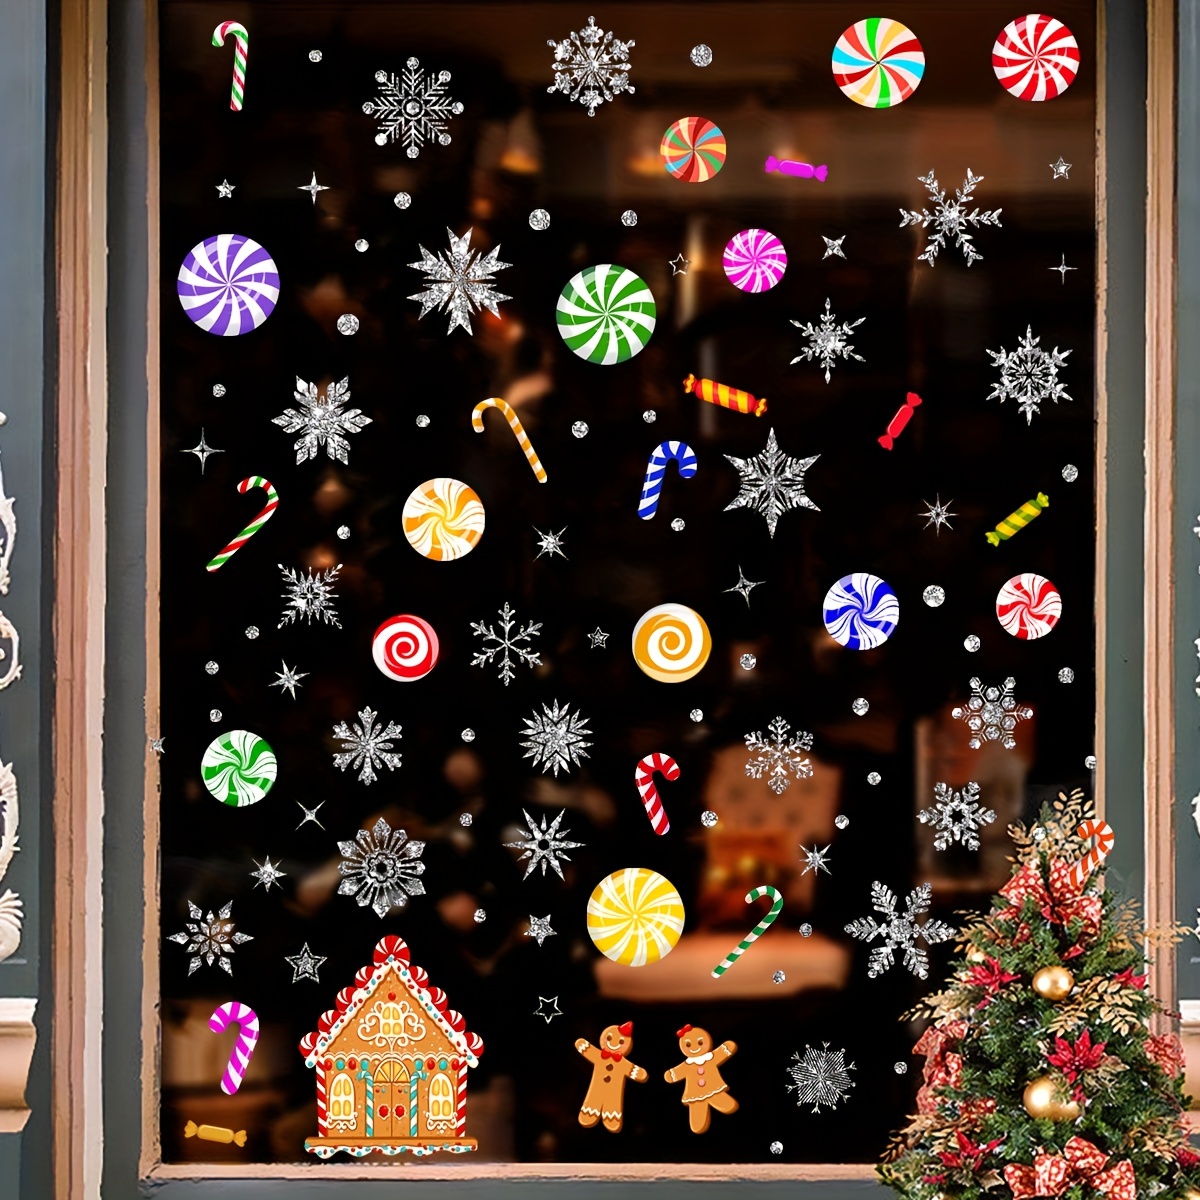 Christmas Window Clings Decor Xmas Thanksgiving Winter Snowflakes Snowman Decals  Sticker for Home Office School New Year Holiday Gel Stickers Party Season  Ornaments Decoration Set of 4 